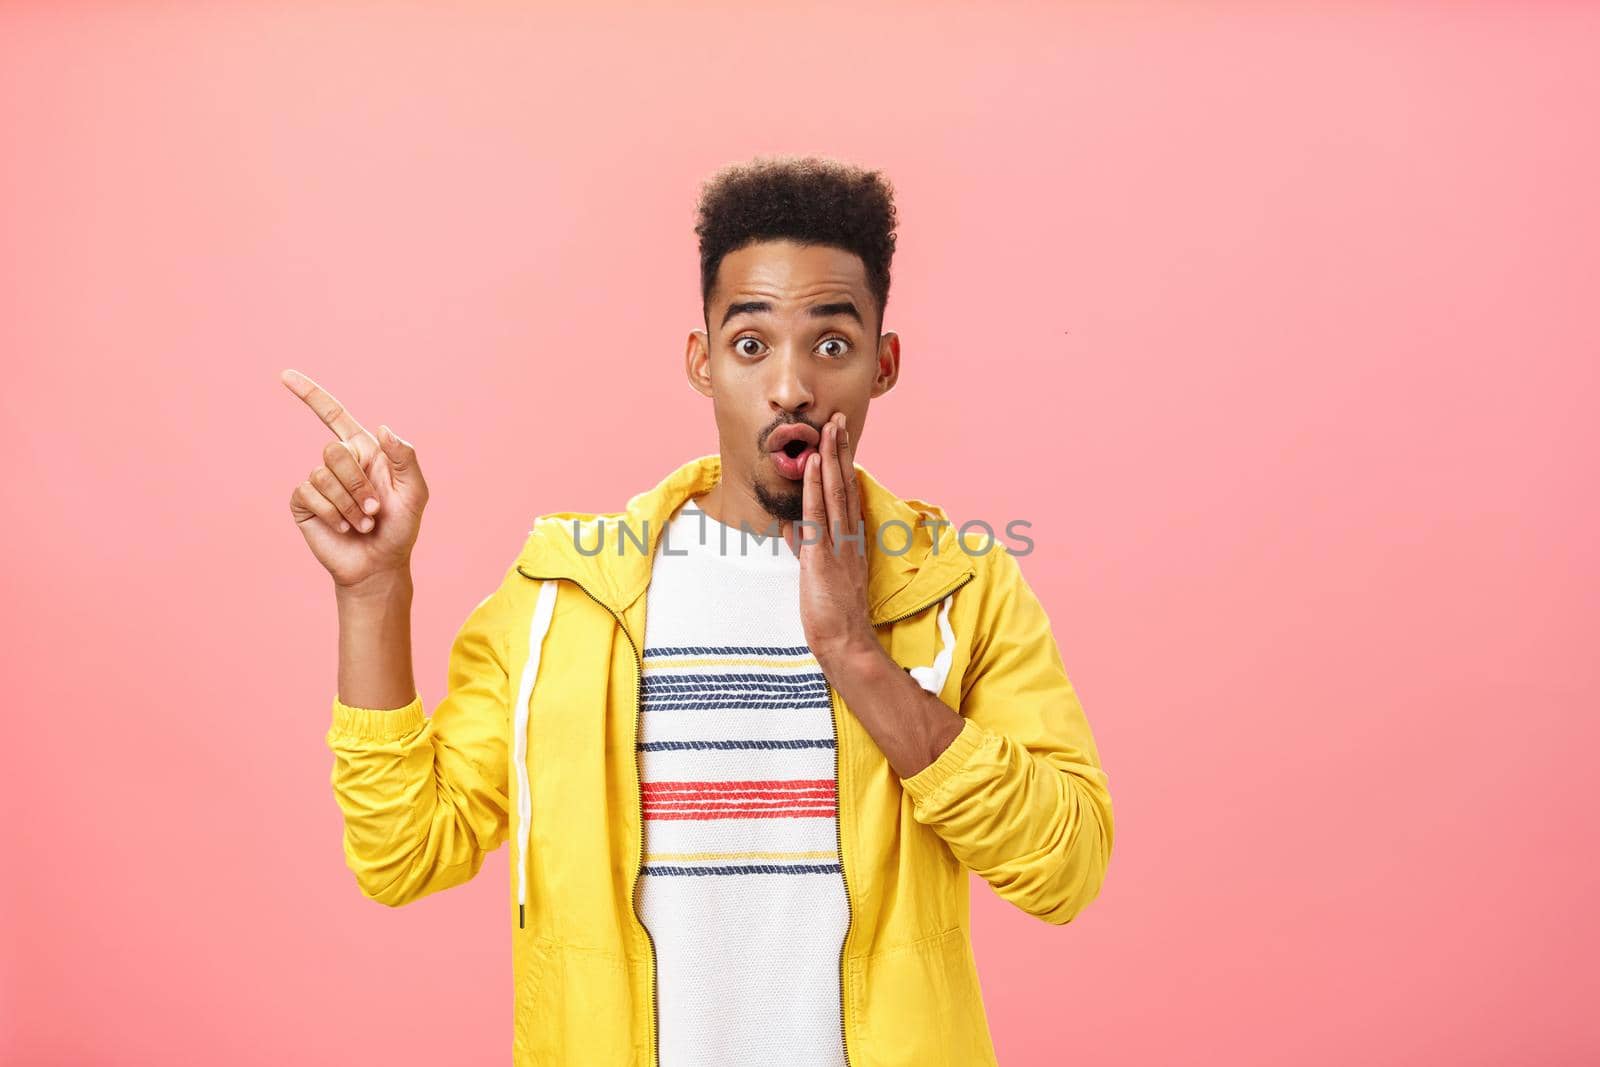 Look I am stunned. Portrait of impressed excited good-looking young male model in stylish yellow jacket opening mouth with gasp covering it with palm pointing amazed at upper left corner. Emotions and advertising concept